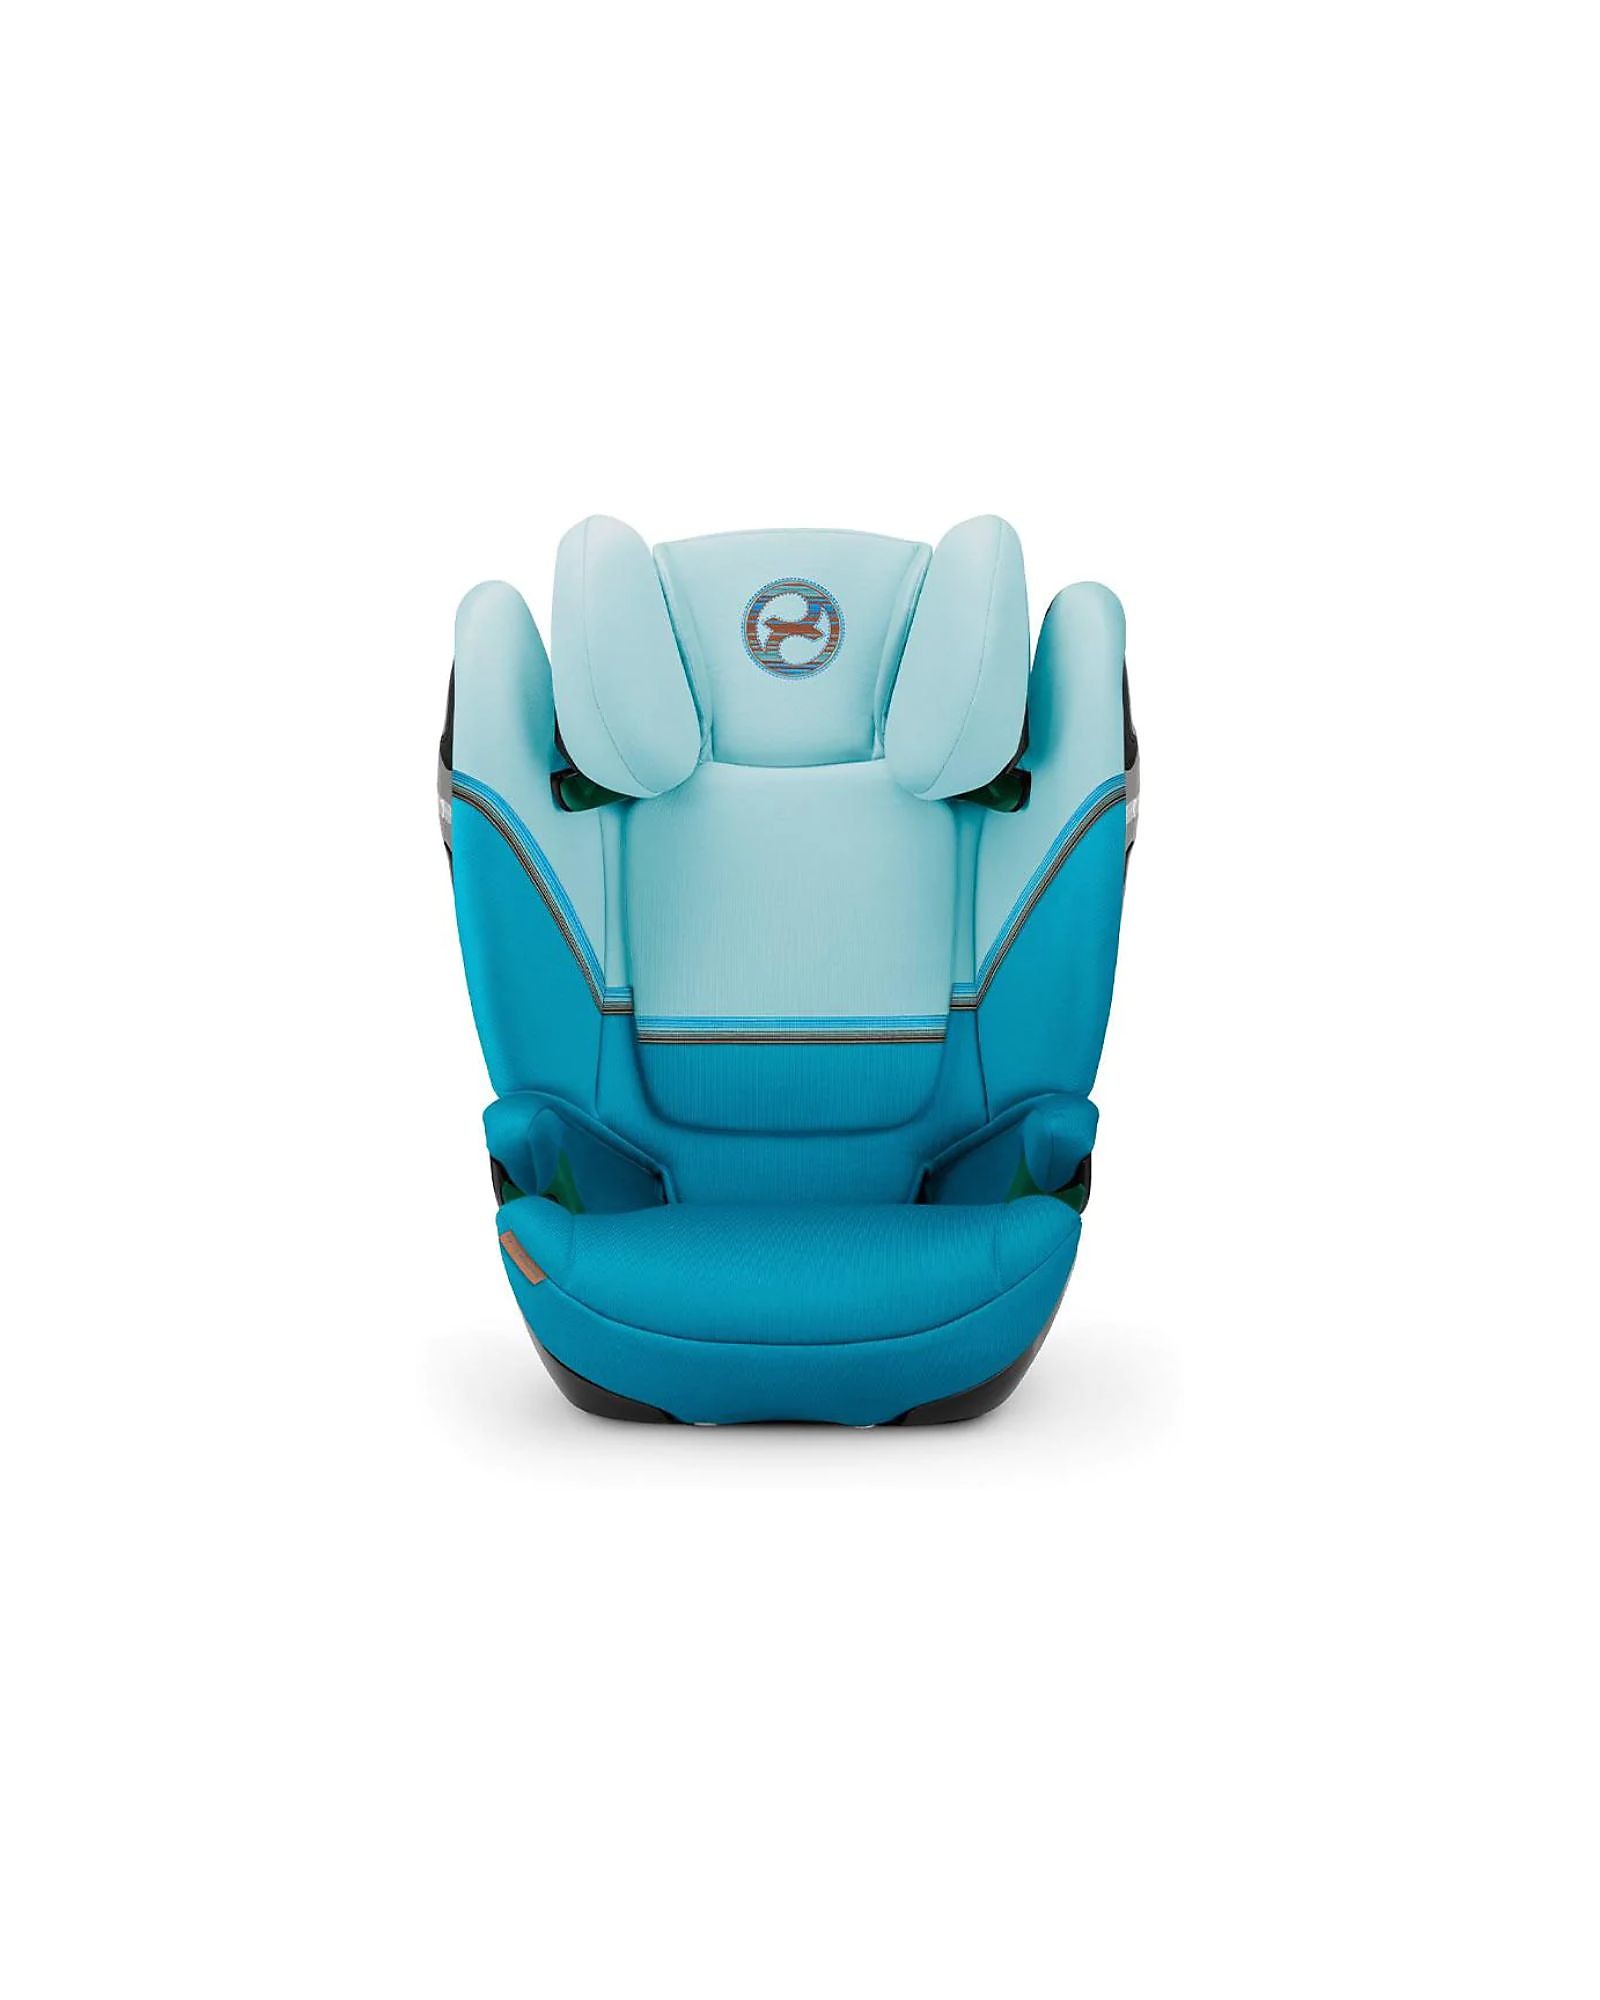 Cybex Solution S2 i-Fix Car Seat - Beach Blue/Turquoise - Group 2/3 unisex  (bambini)